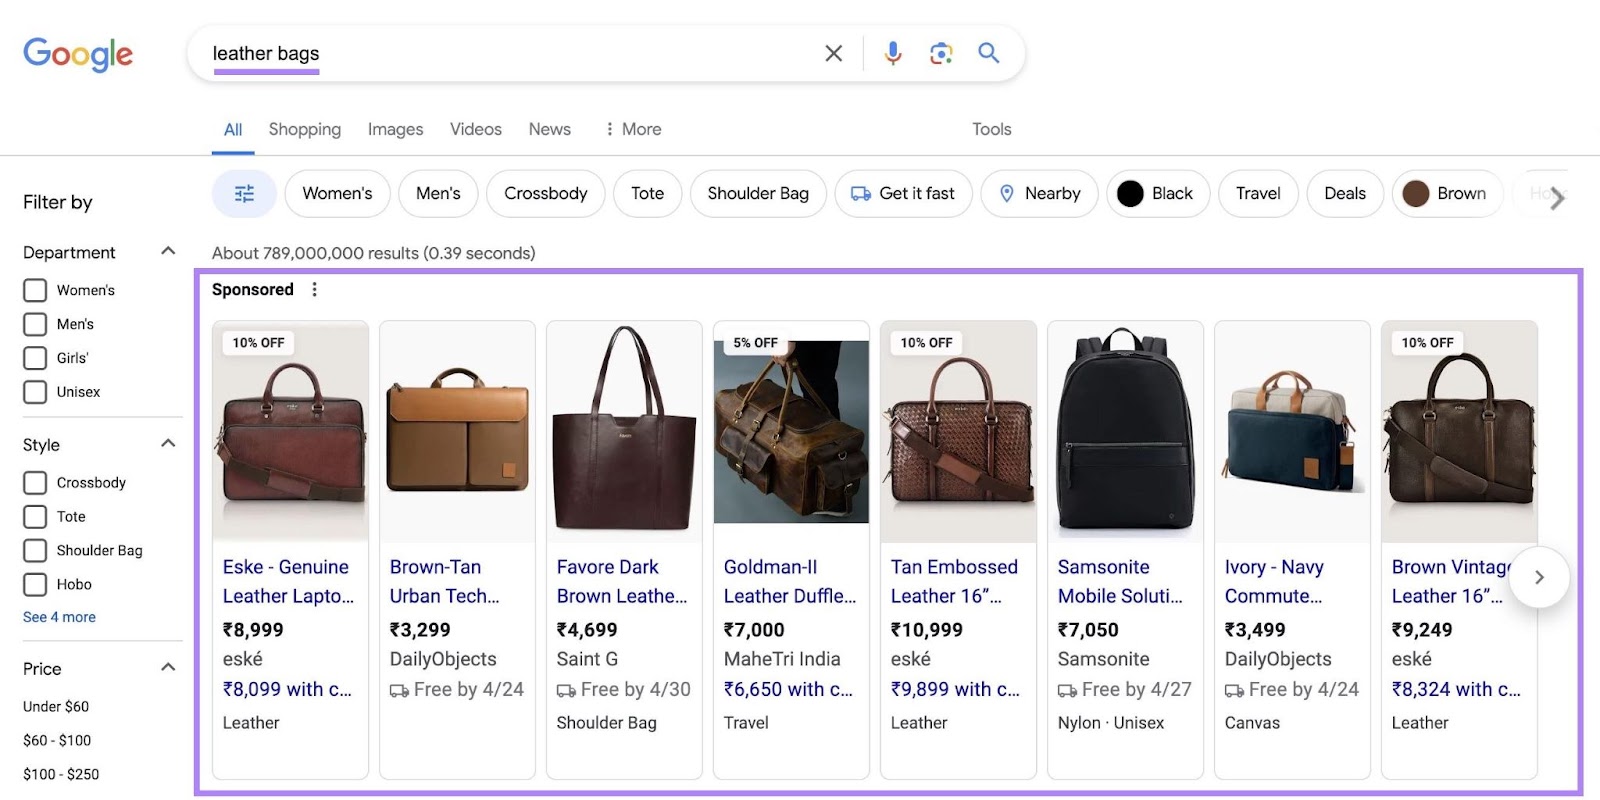 Google Shopping results for "leather bags" showing sponsored ads arsenic  the apical  results.